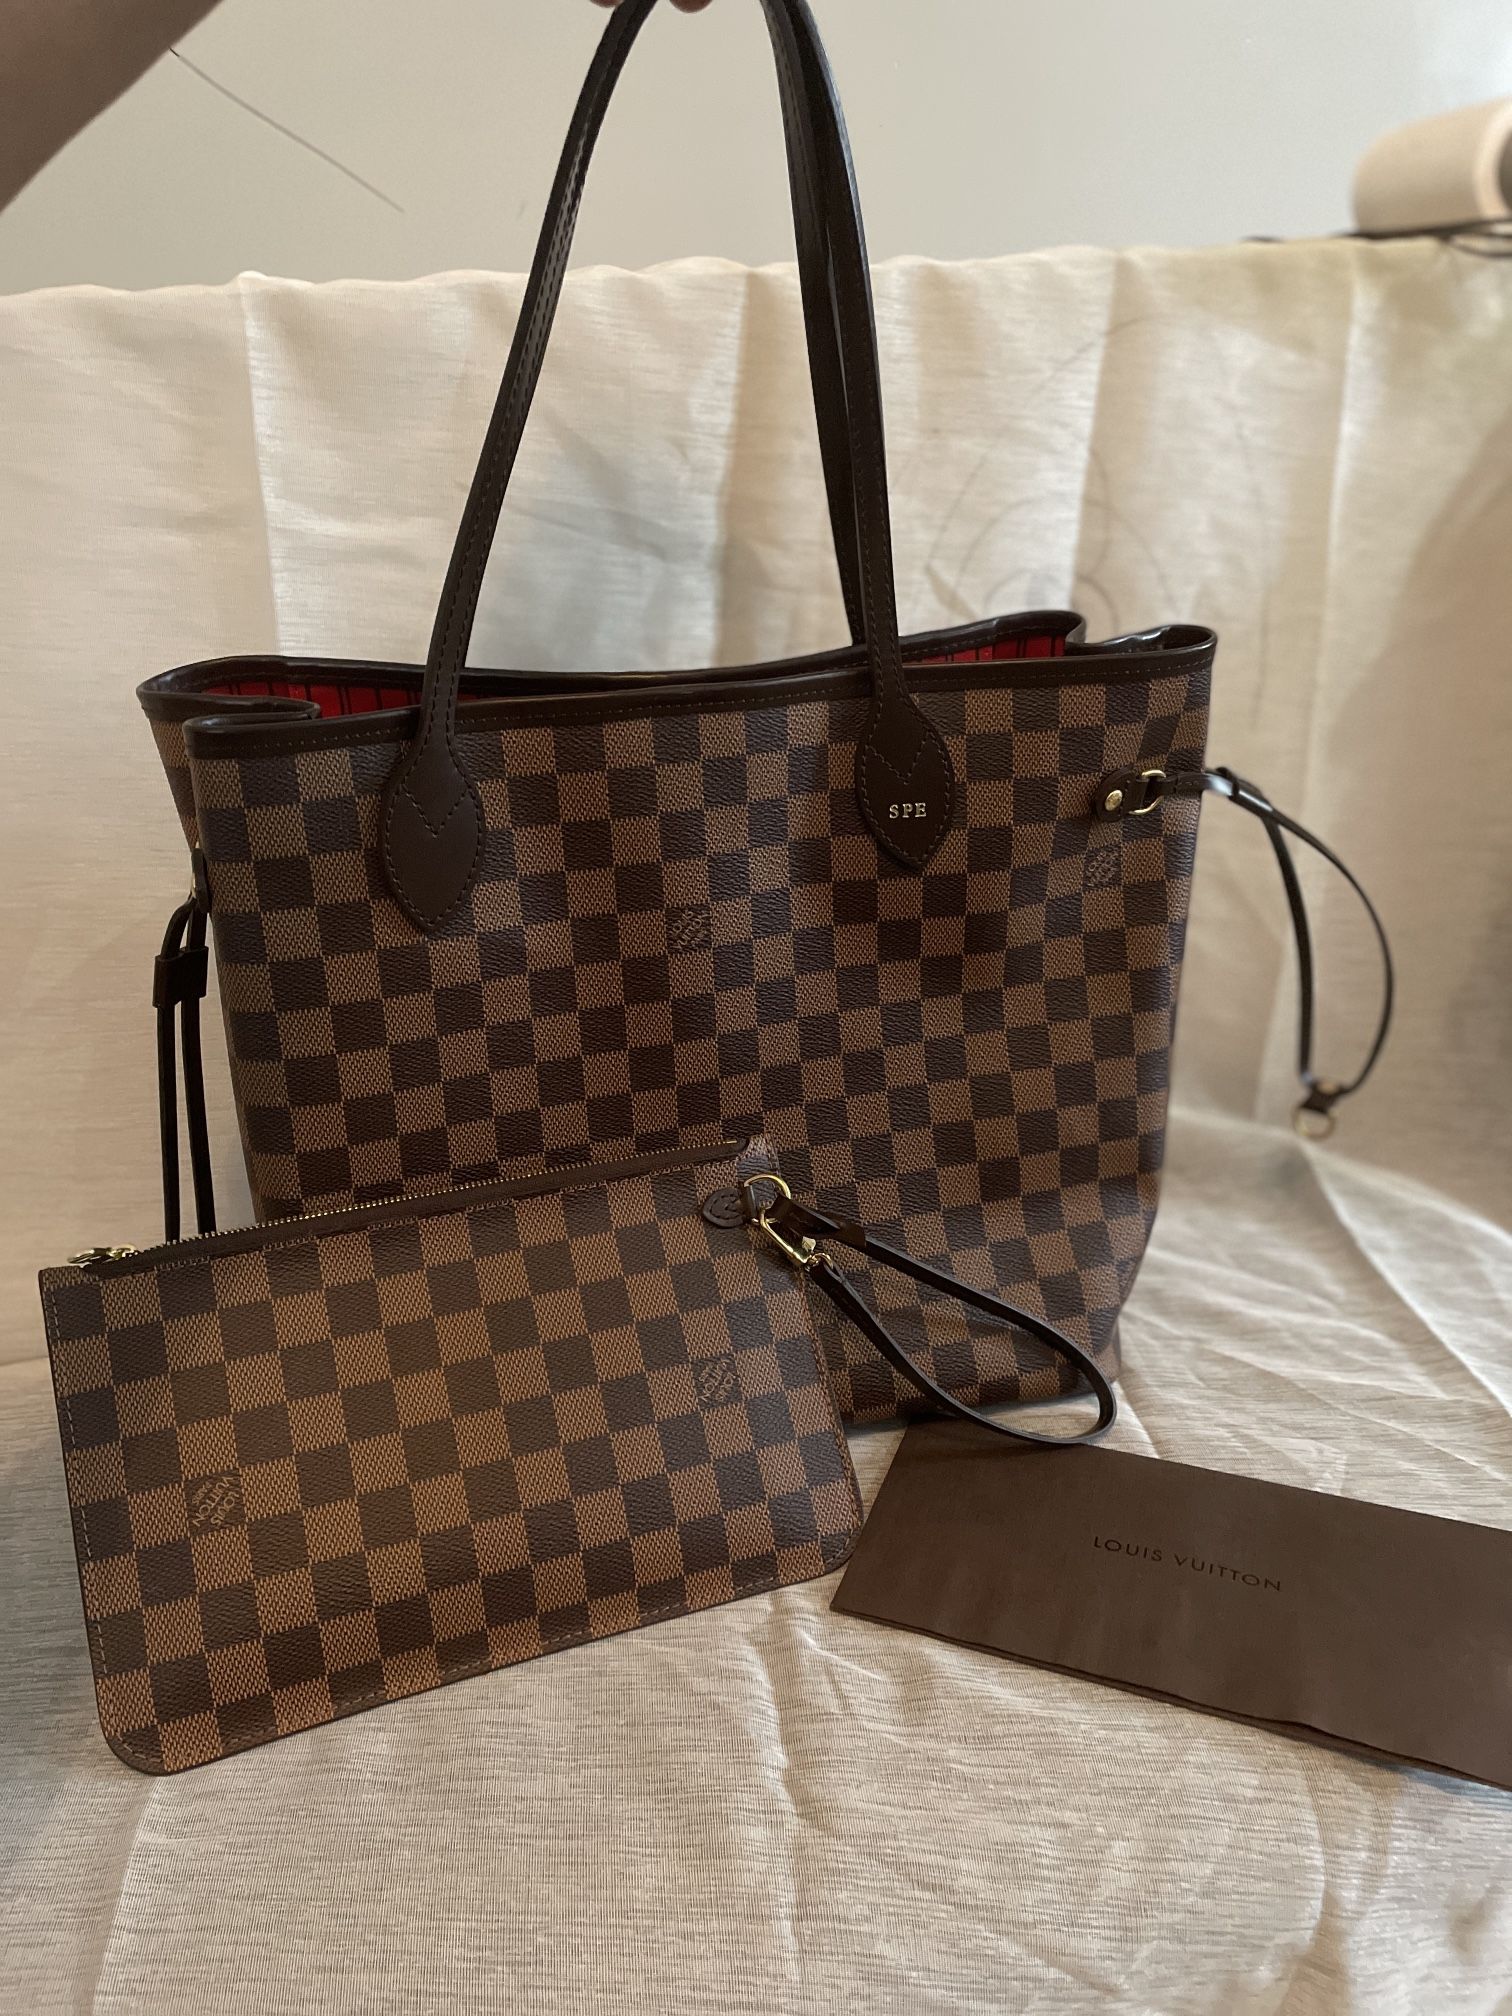 Authentic Louis Vuitton Neverfull MM - clothing & accessories - by